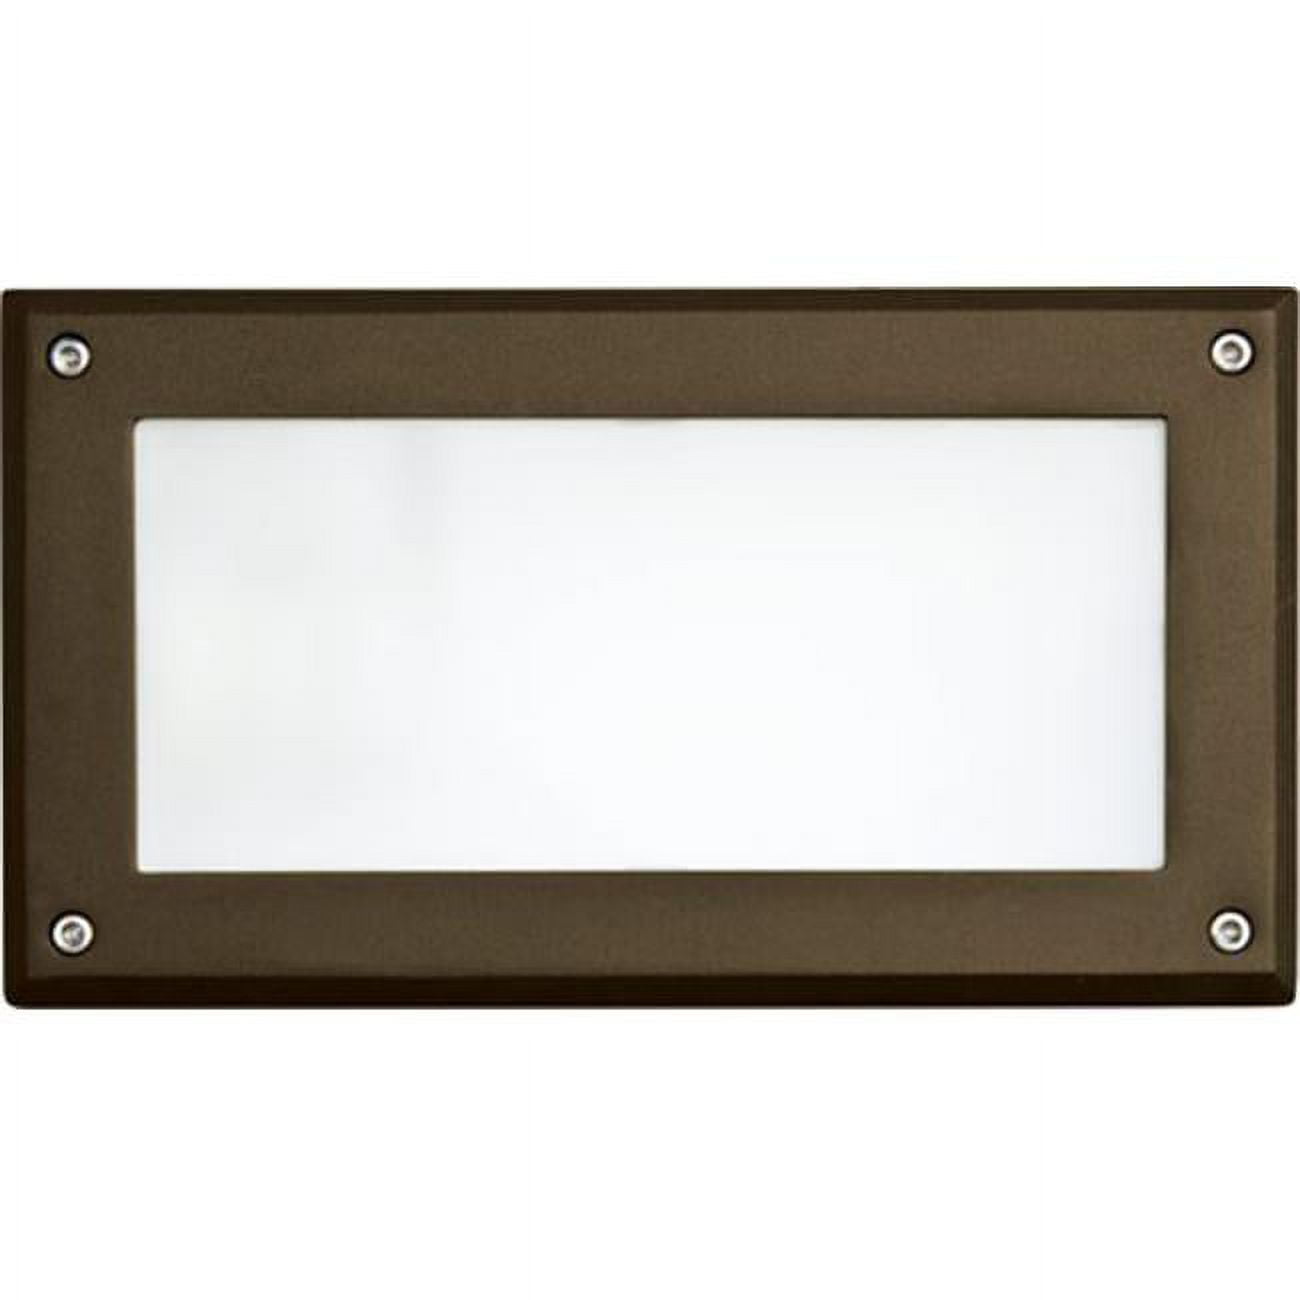 Recessed Open Face Brick, Step & Wall Light - 9w 120v, Bronze